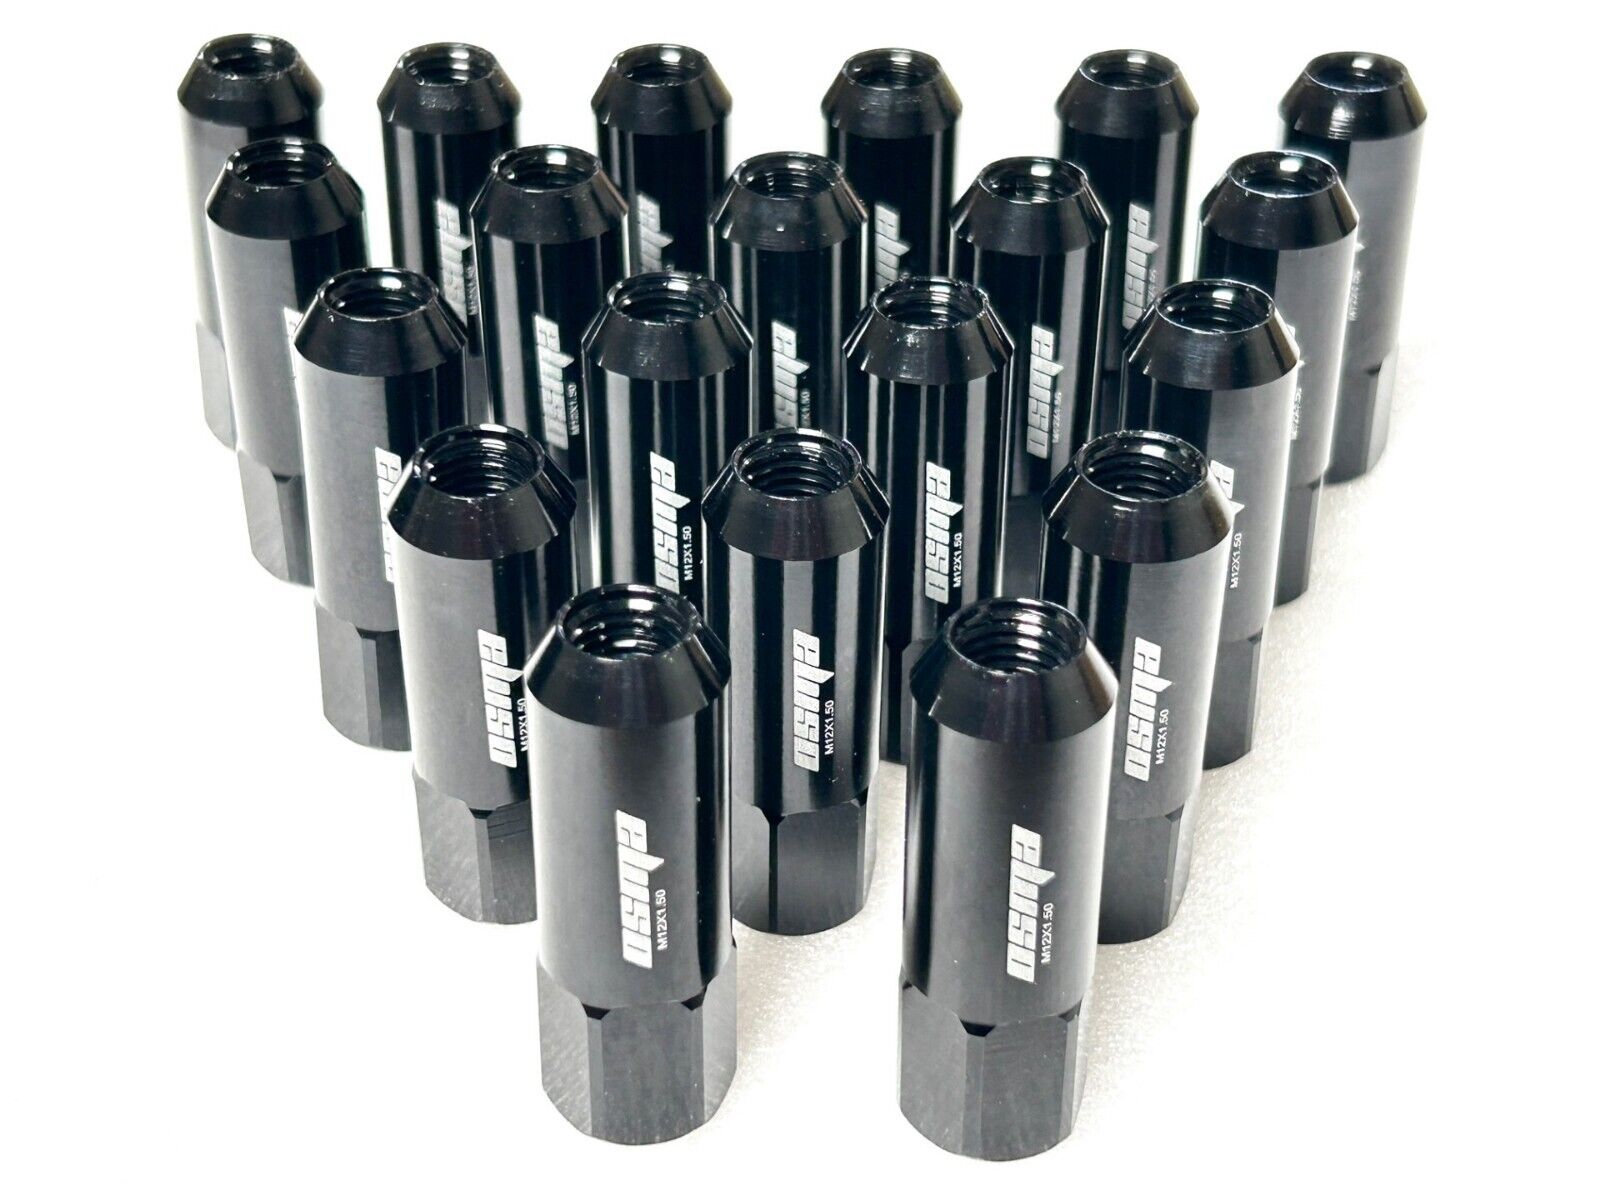 20pcs Black M12X1.5 60mm Extended Forged Aluminum Tuner Racing Wheel Lug Nuts